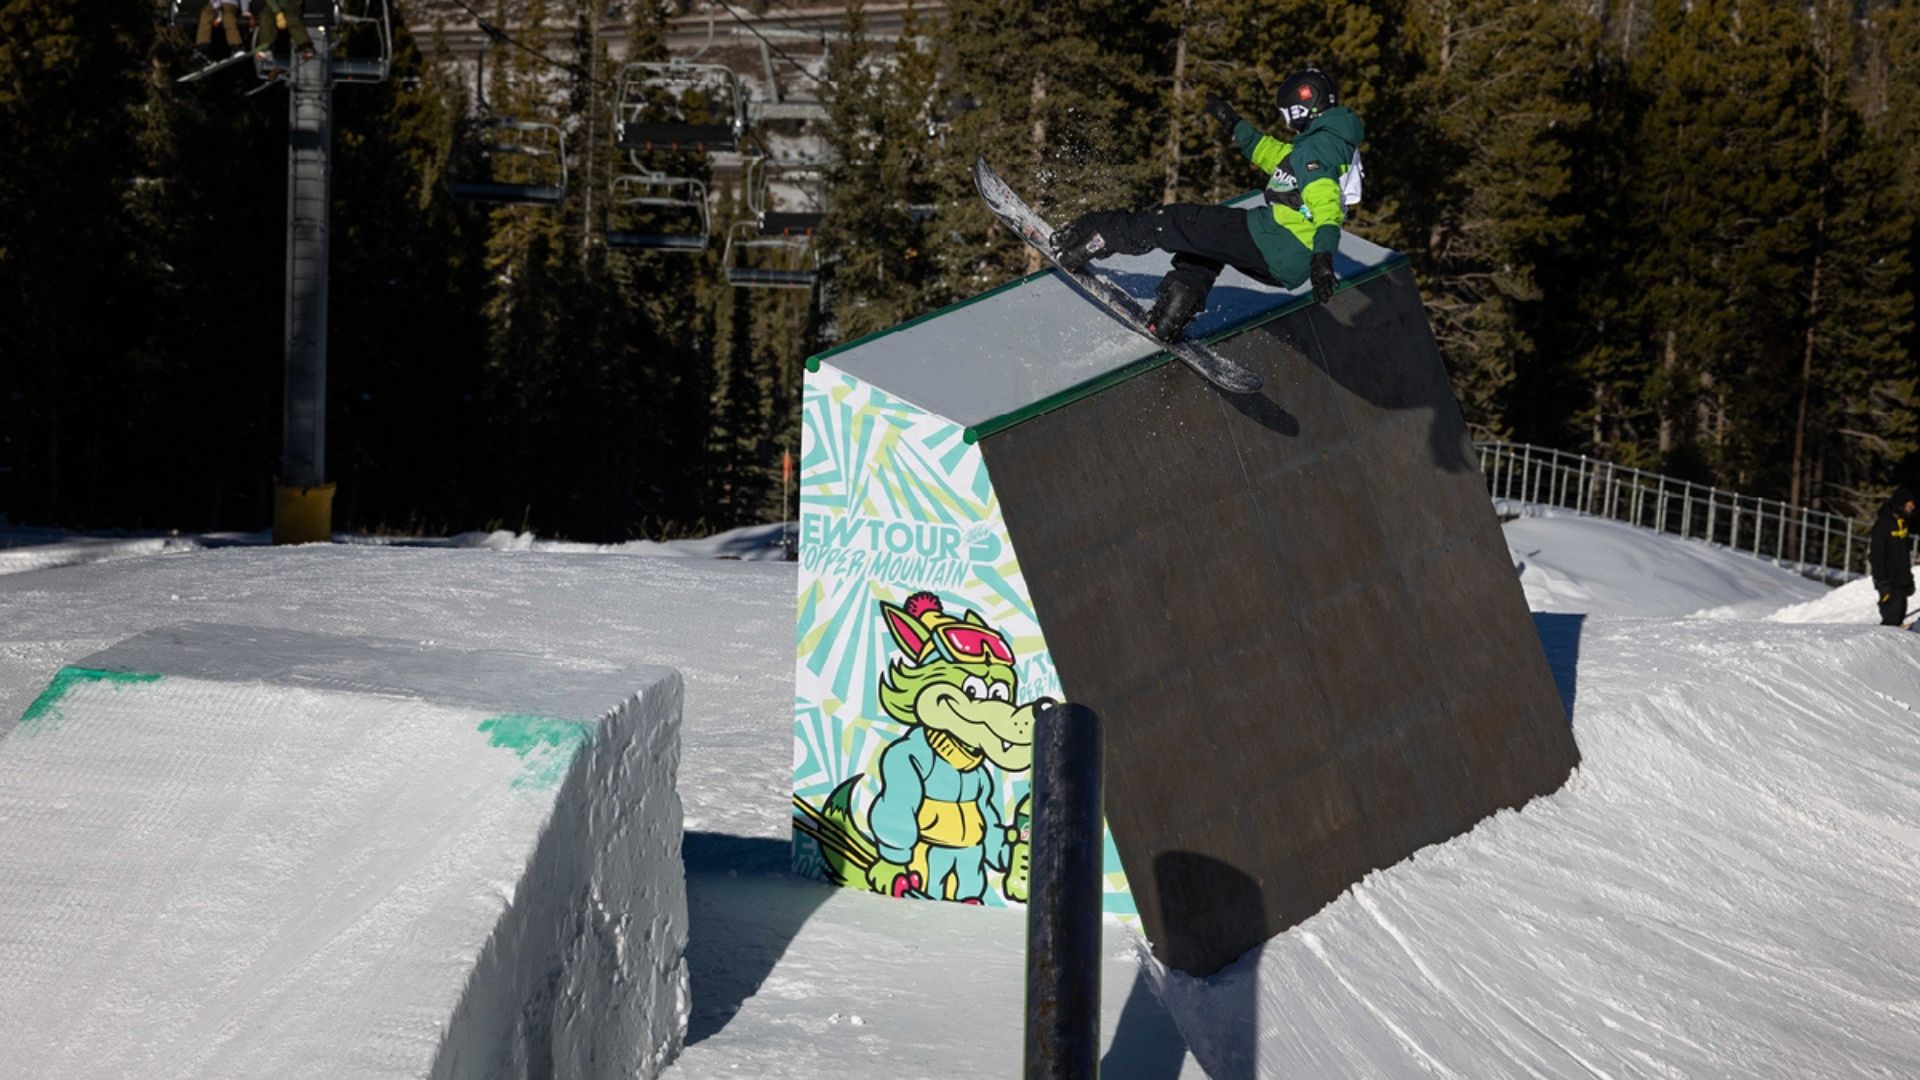 Dew Tour Copper Mountain is ON! Finals Going Down this Weekend...How to